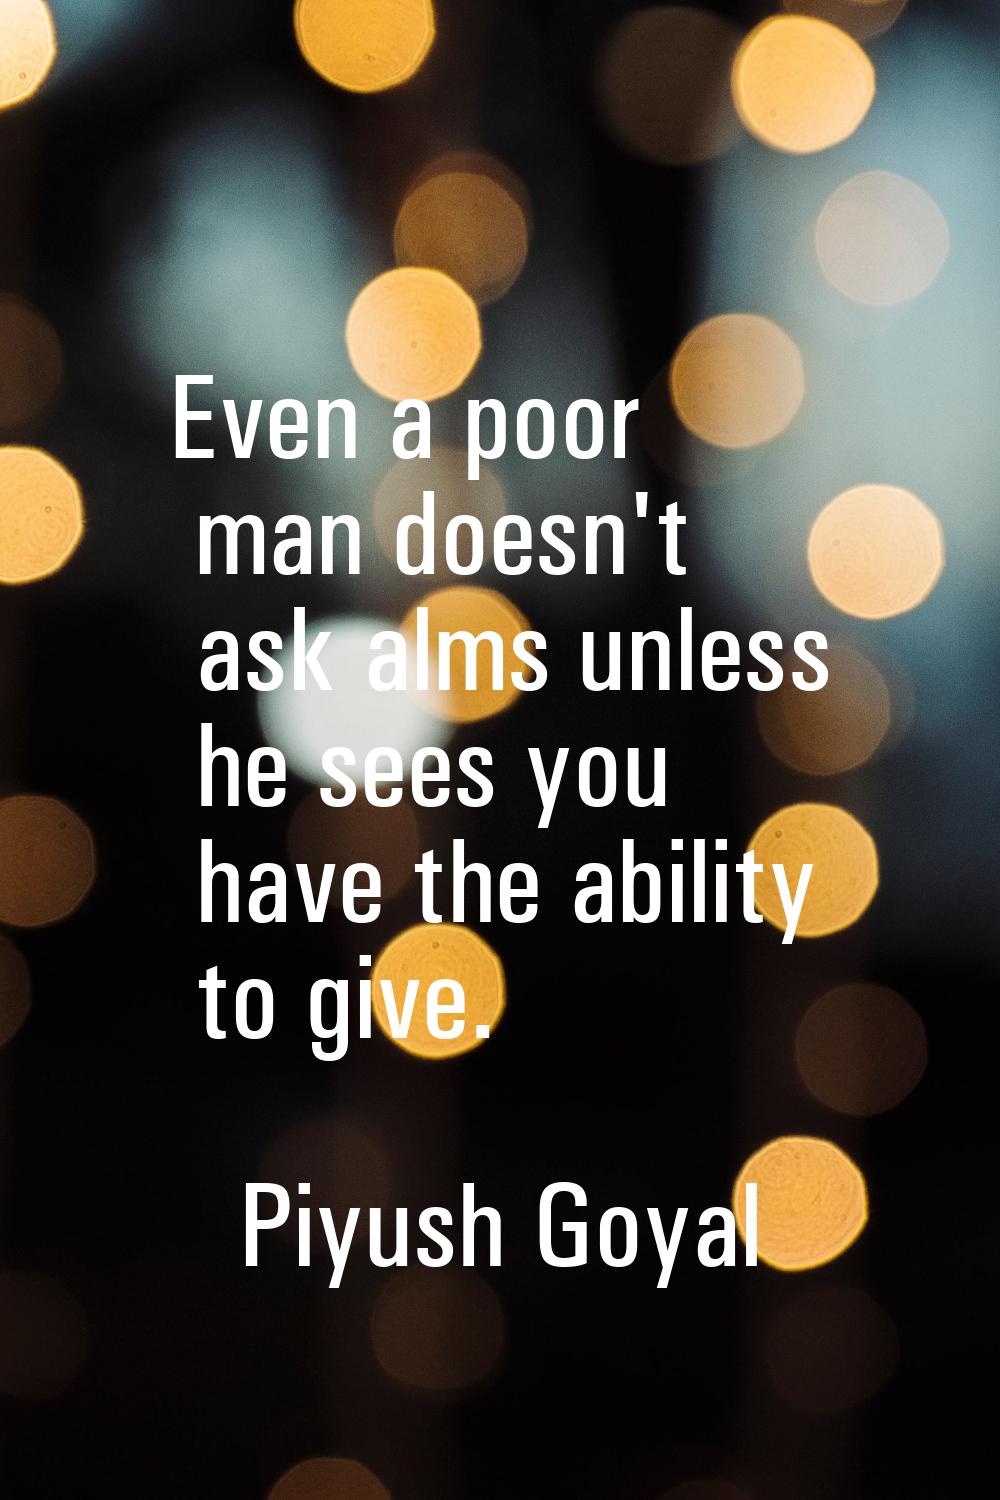 Even a poor man doesn't ask alms unless he sees you have the ability to give.